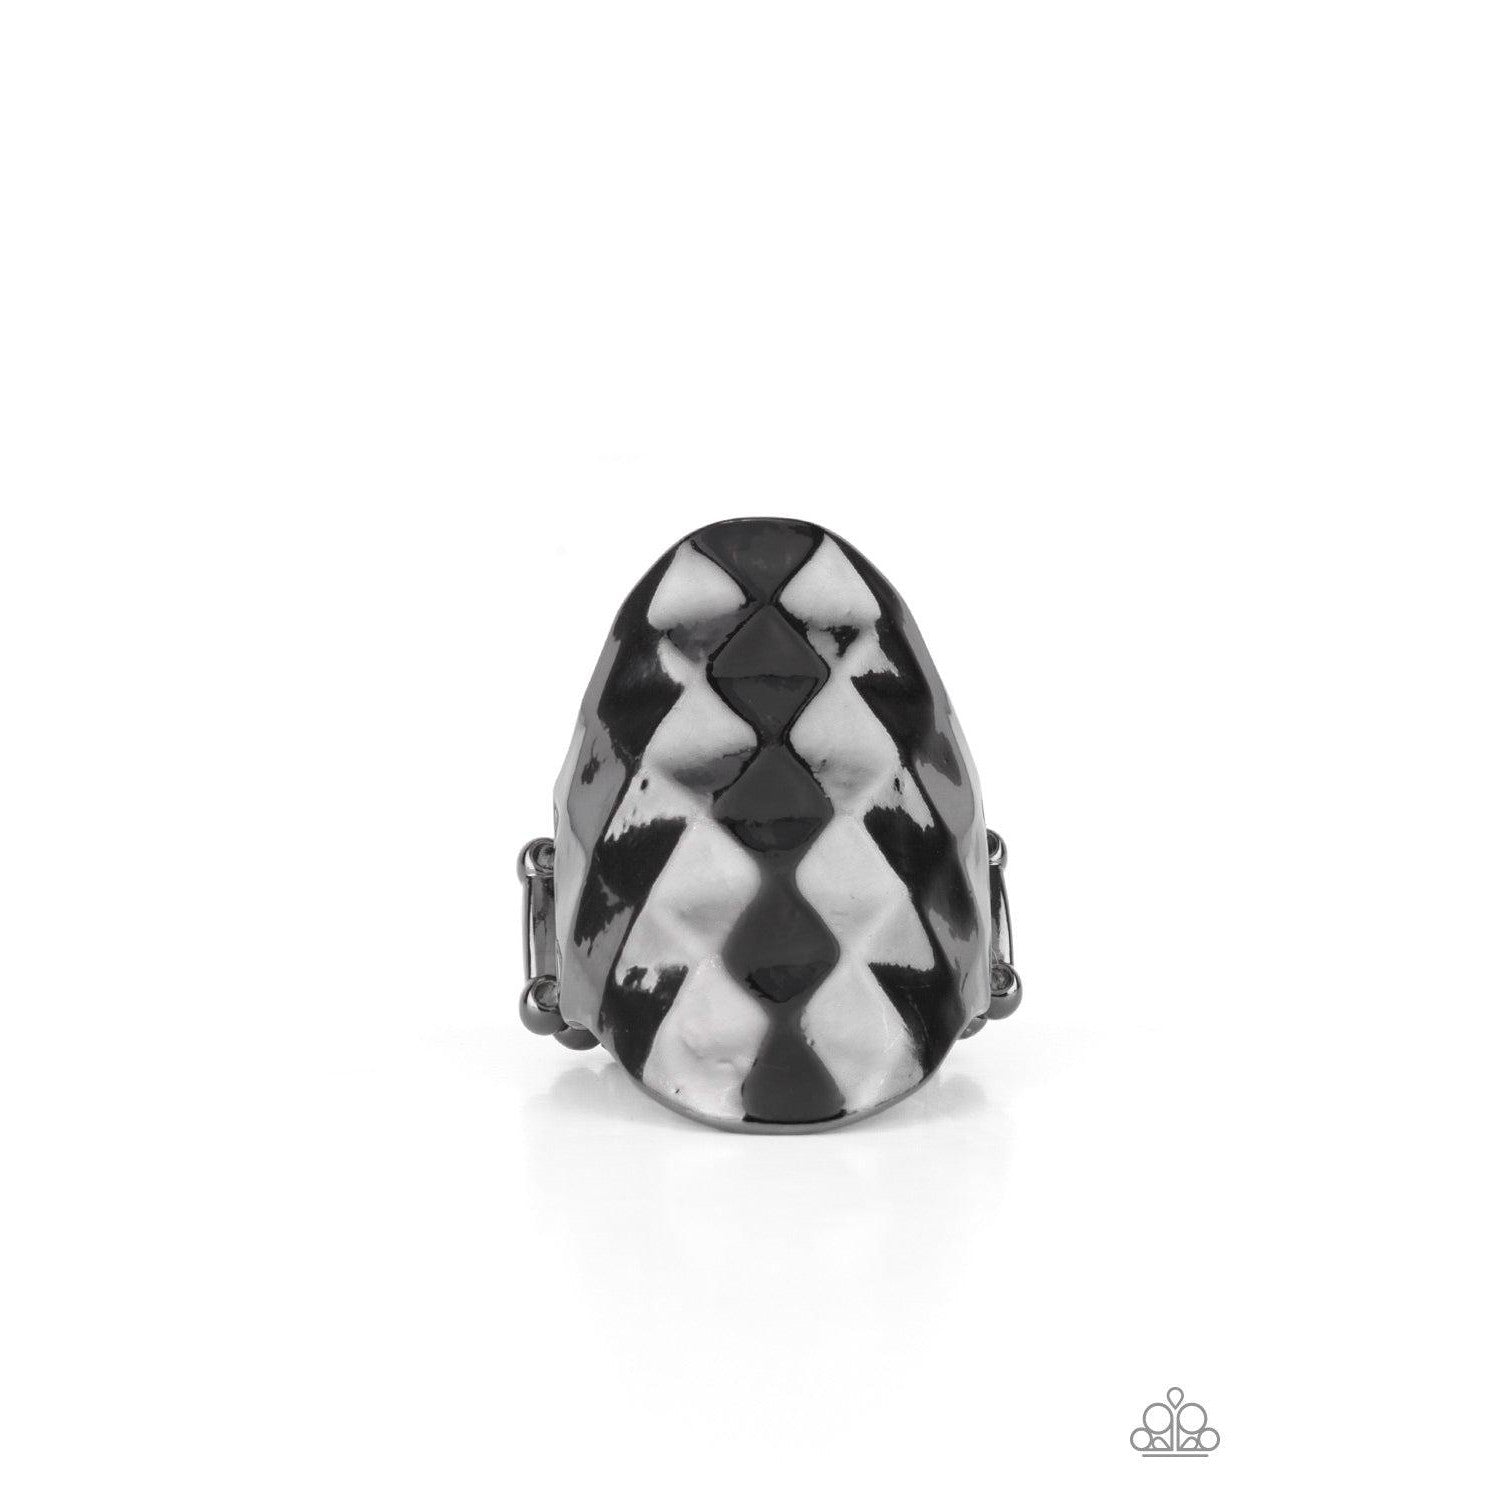 Ferociously Faceted - Black Gunmetal Ring - A Large Selection Hand-Chains And Jewelry On rainbowartsreview,Women's Jewelry | Necklaces, Earrings, Bracelets